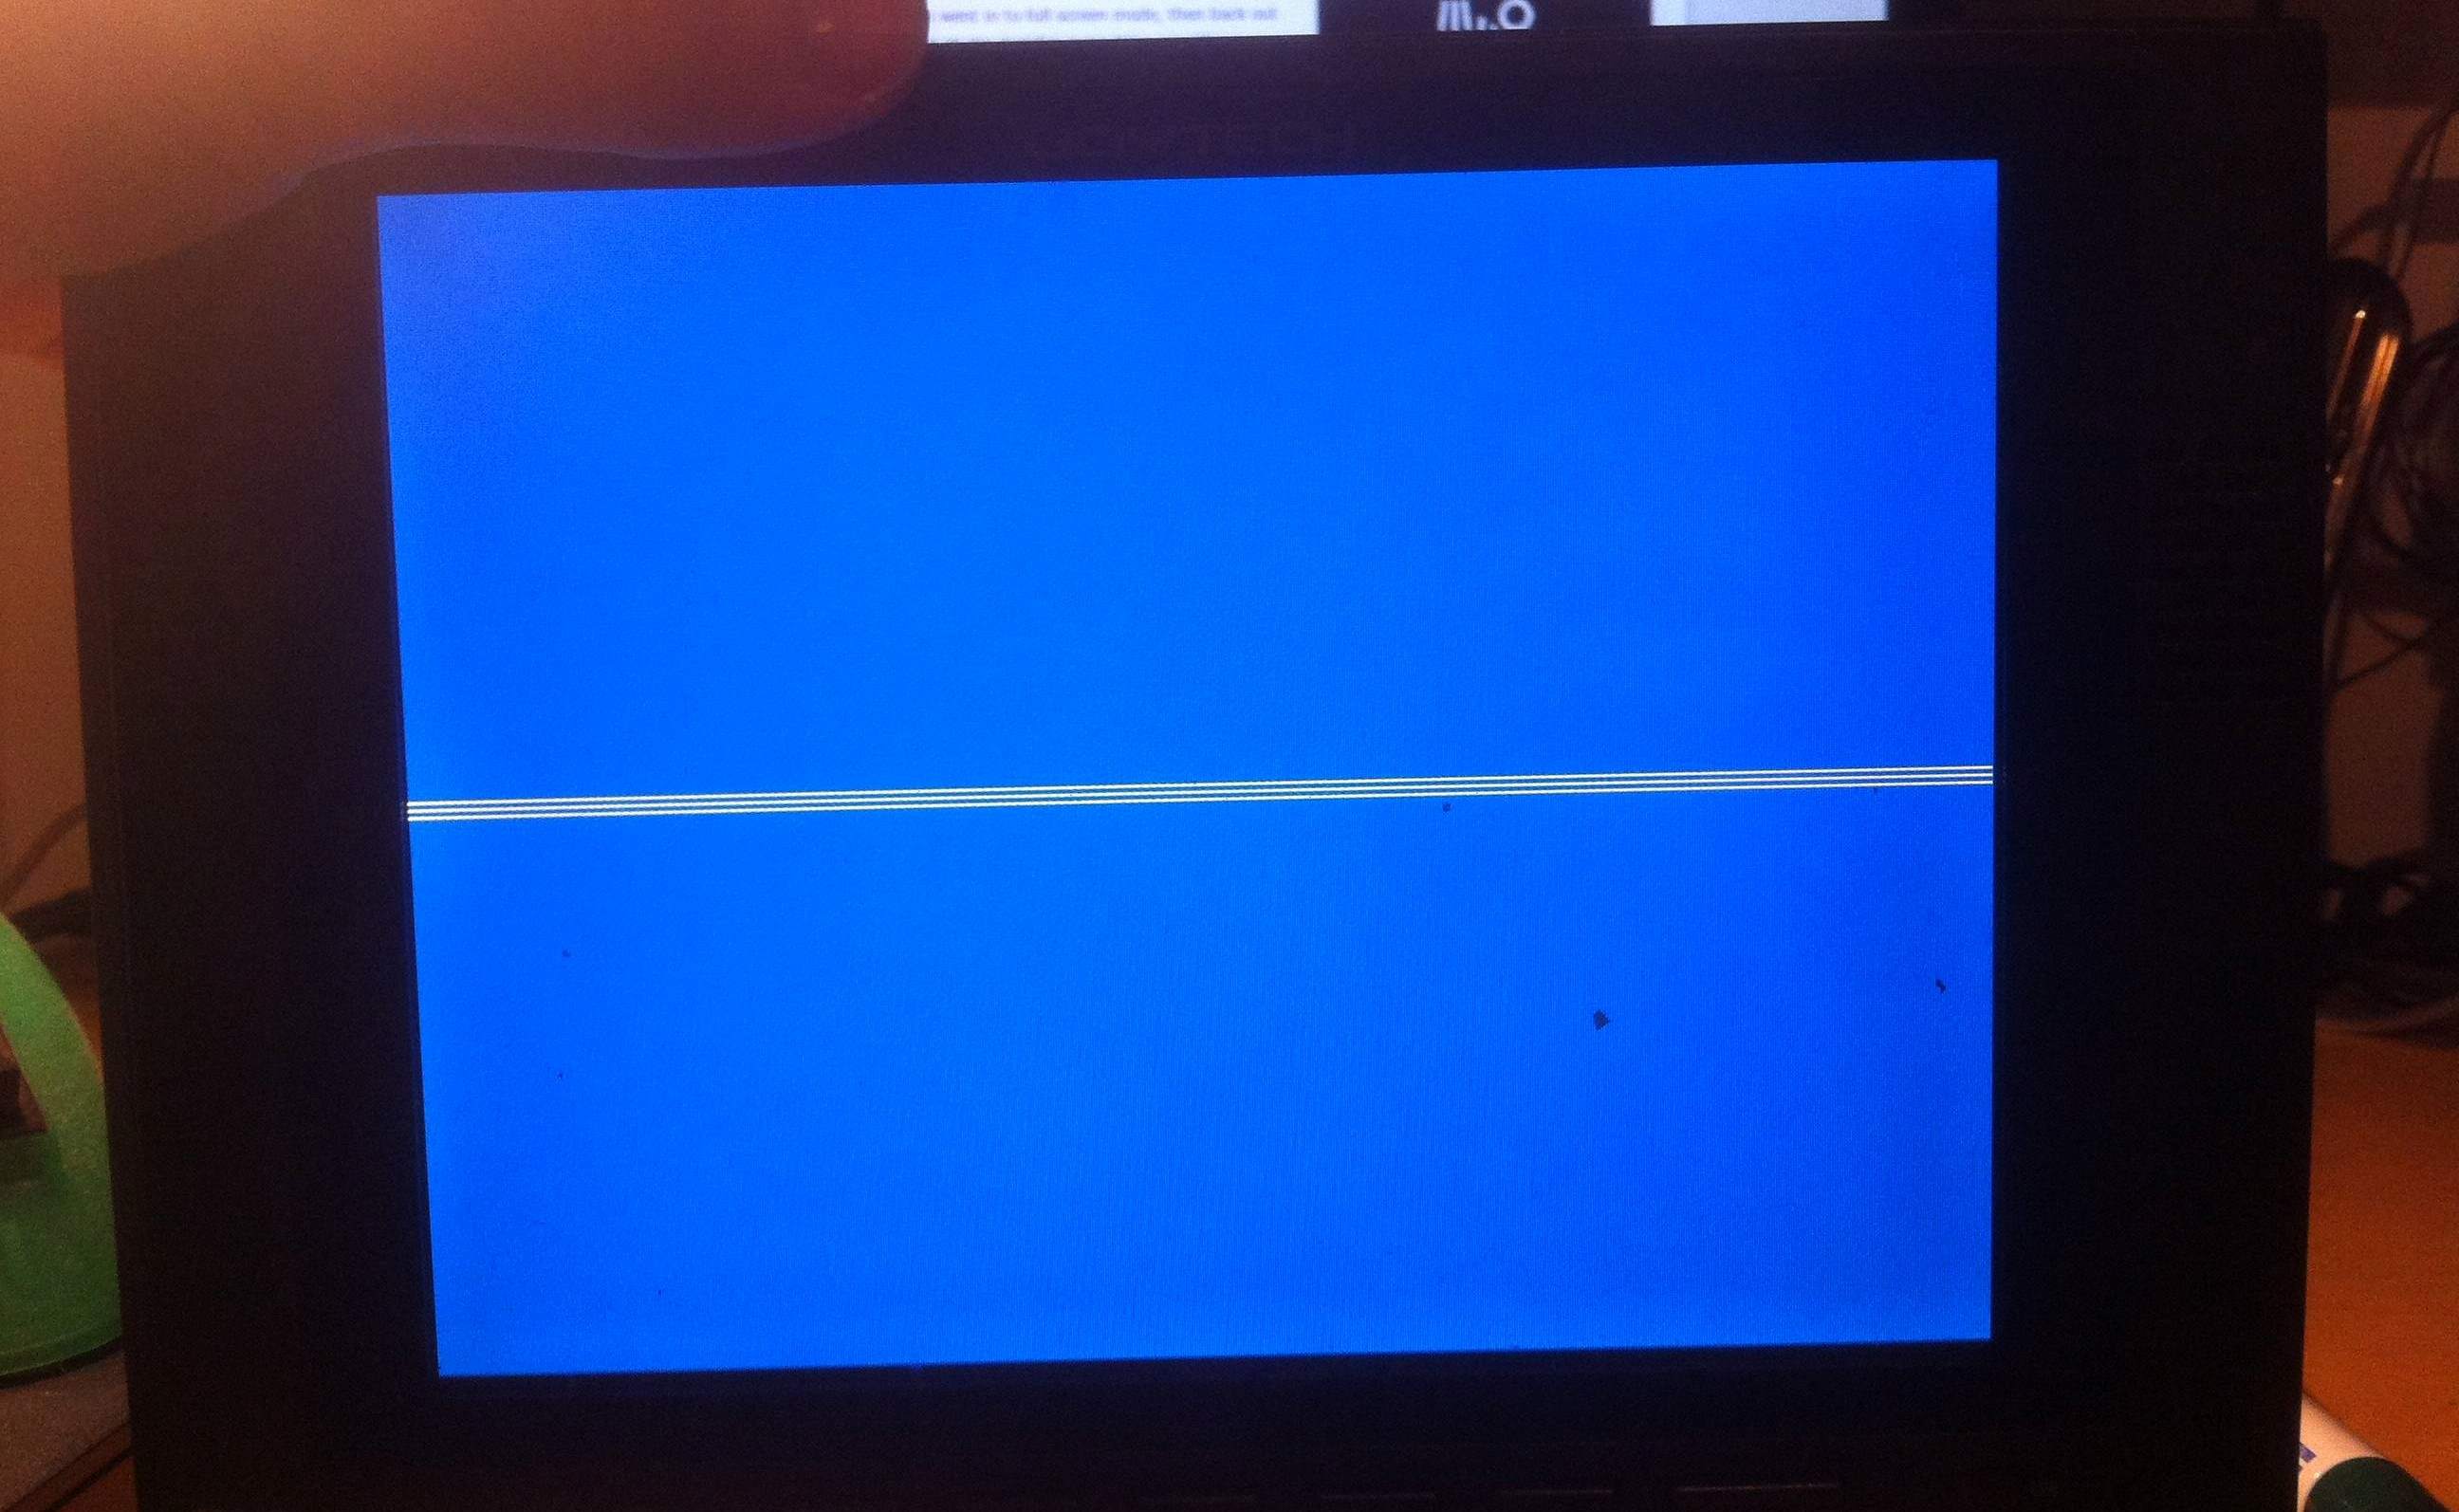 How To Fix Horizontal Lines On A Computer Screen